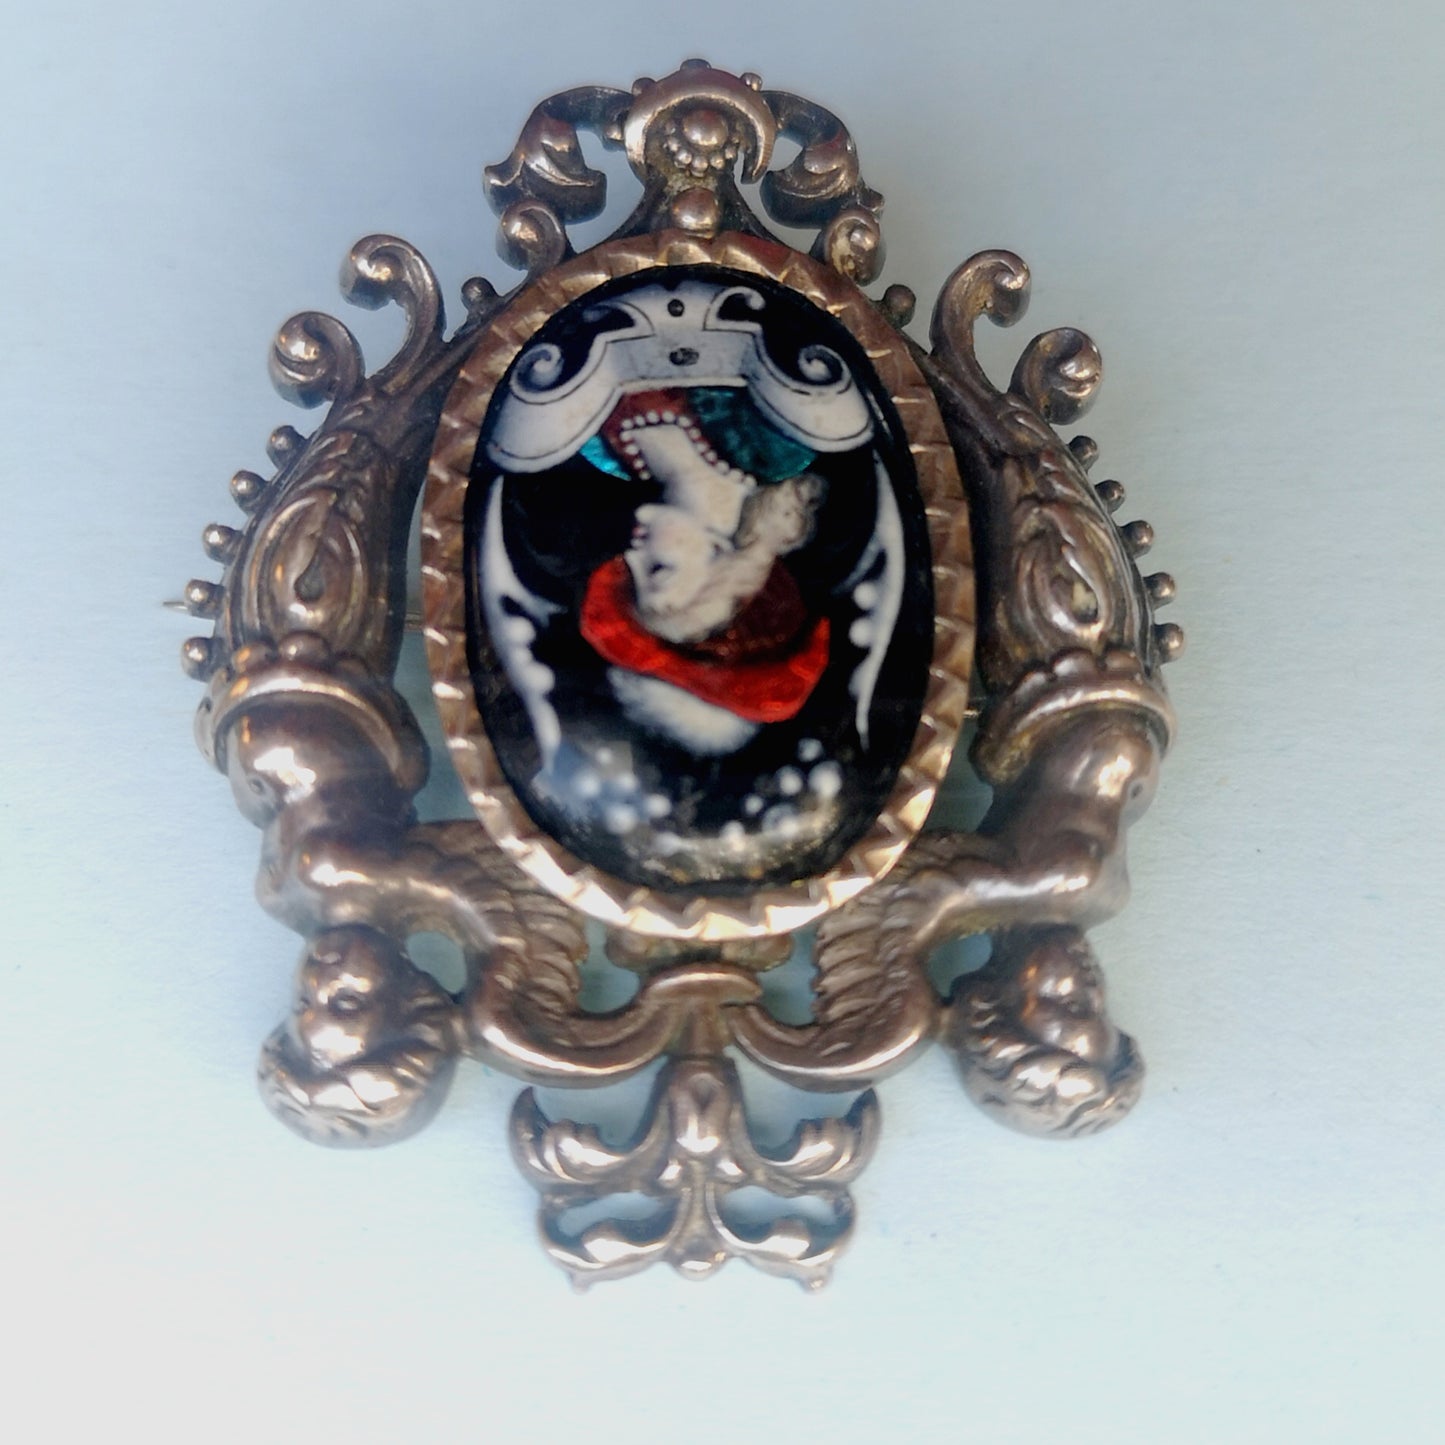 The 19th century medieval style dandy with putti frame - Medea's Mix